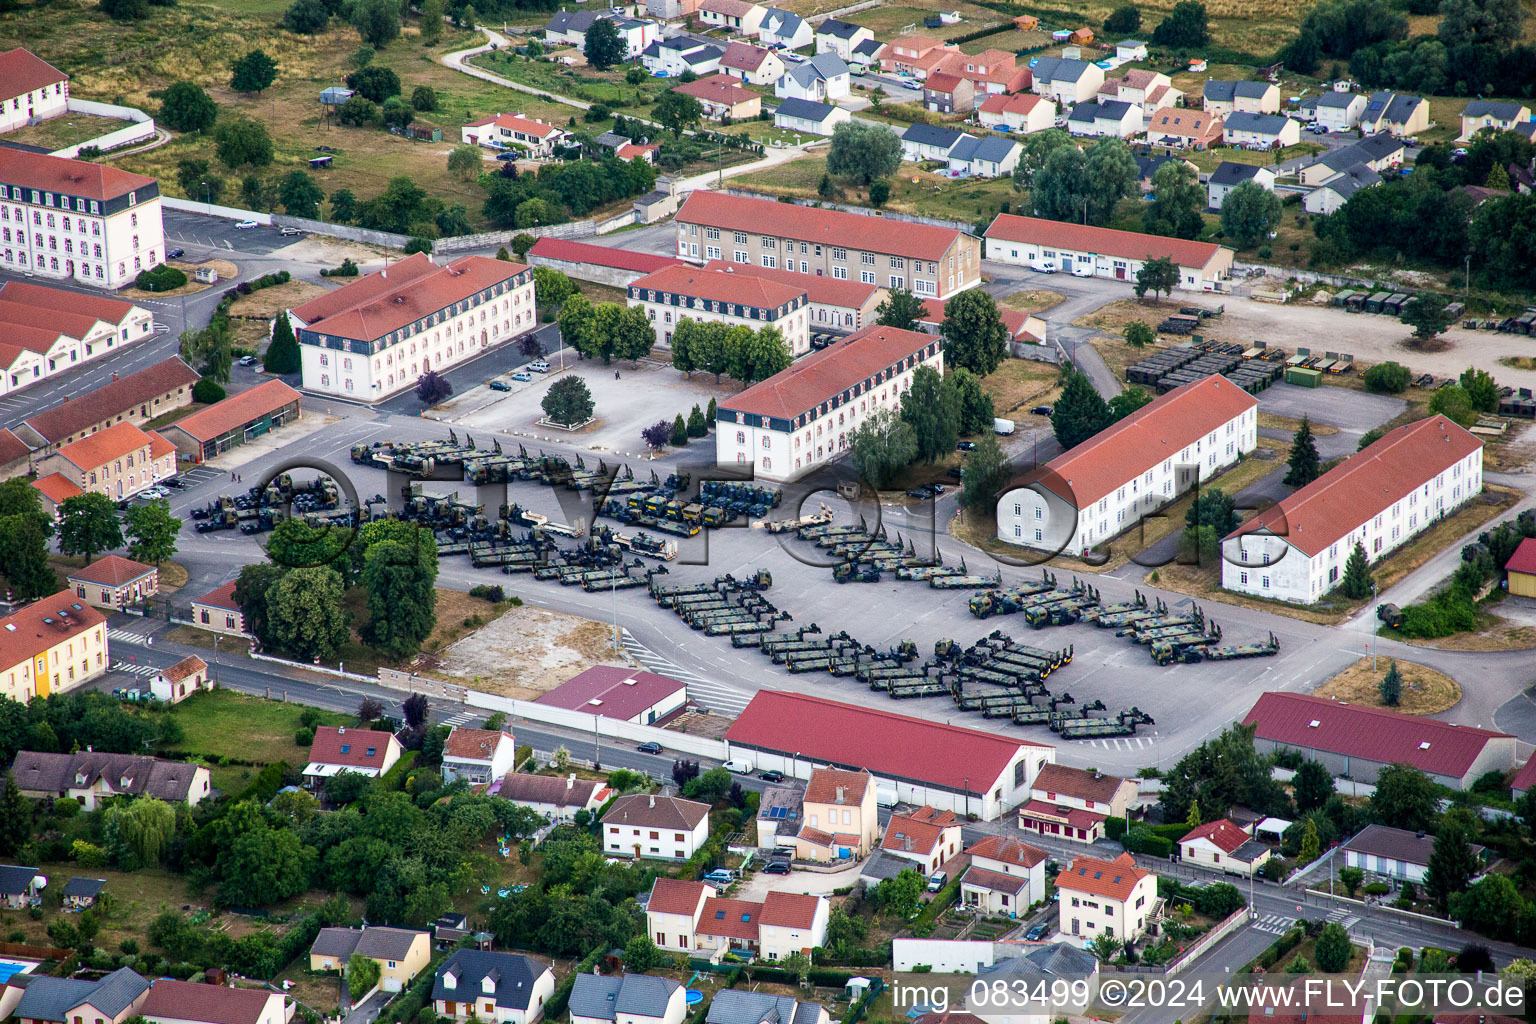 Building complex of the French army - military barracks of the 516th railway Regiment in Ecrouves in Grand Est, France